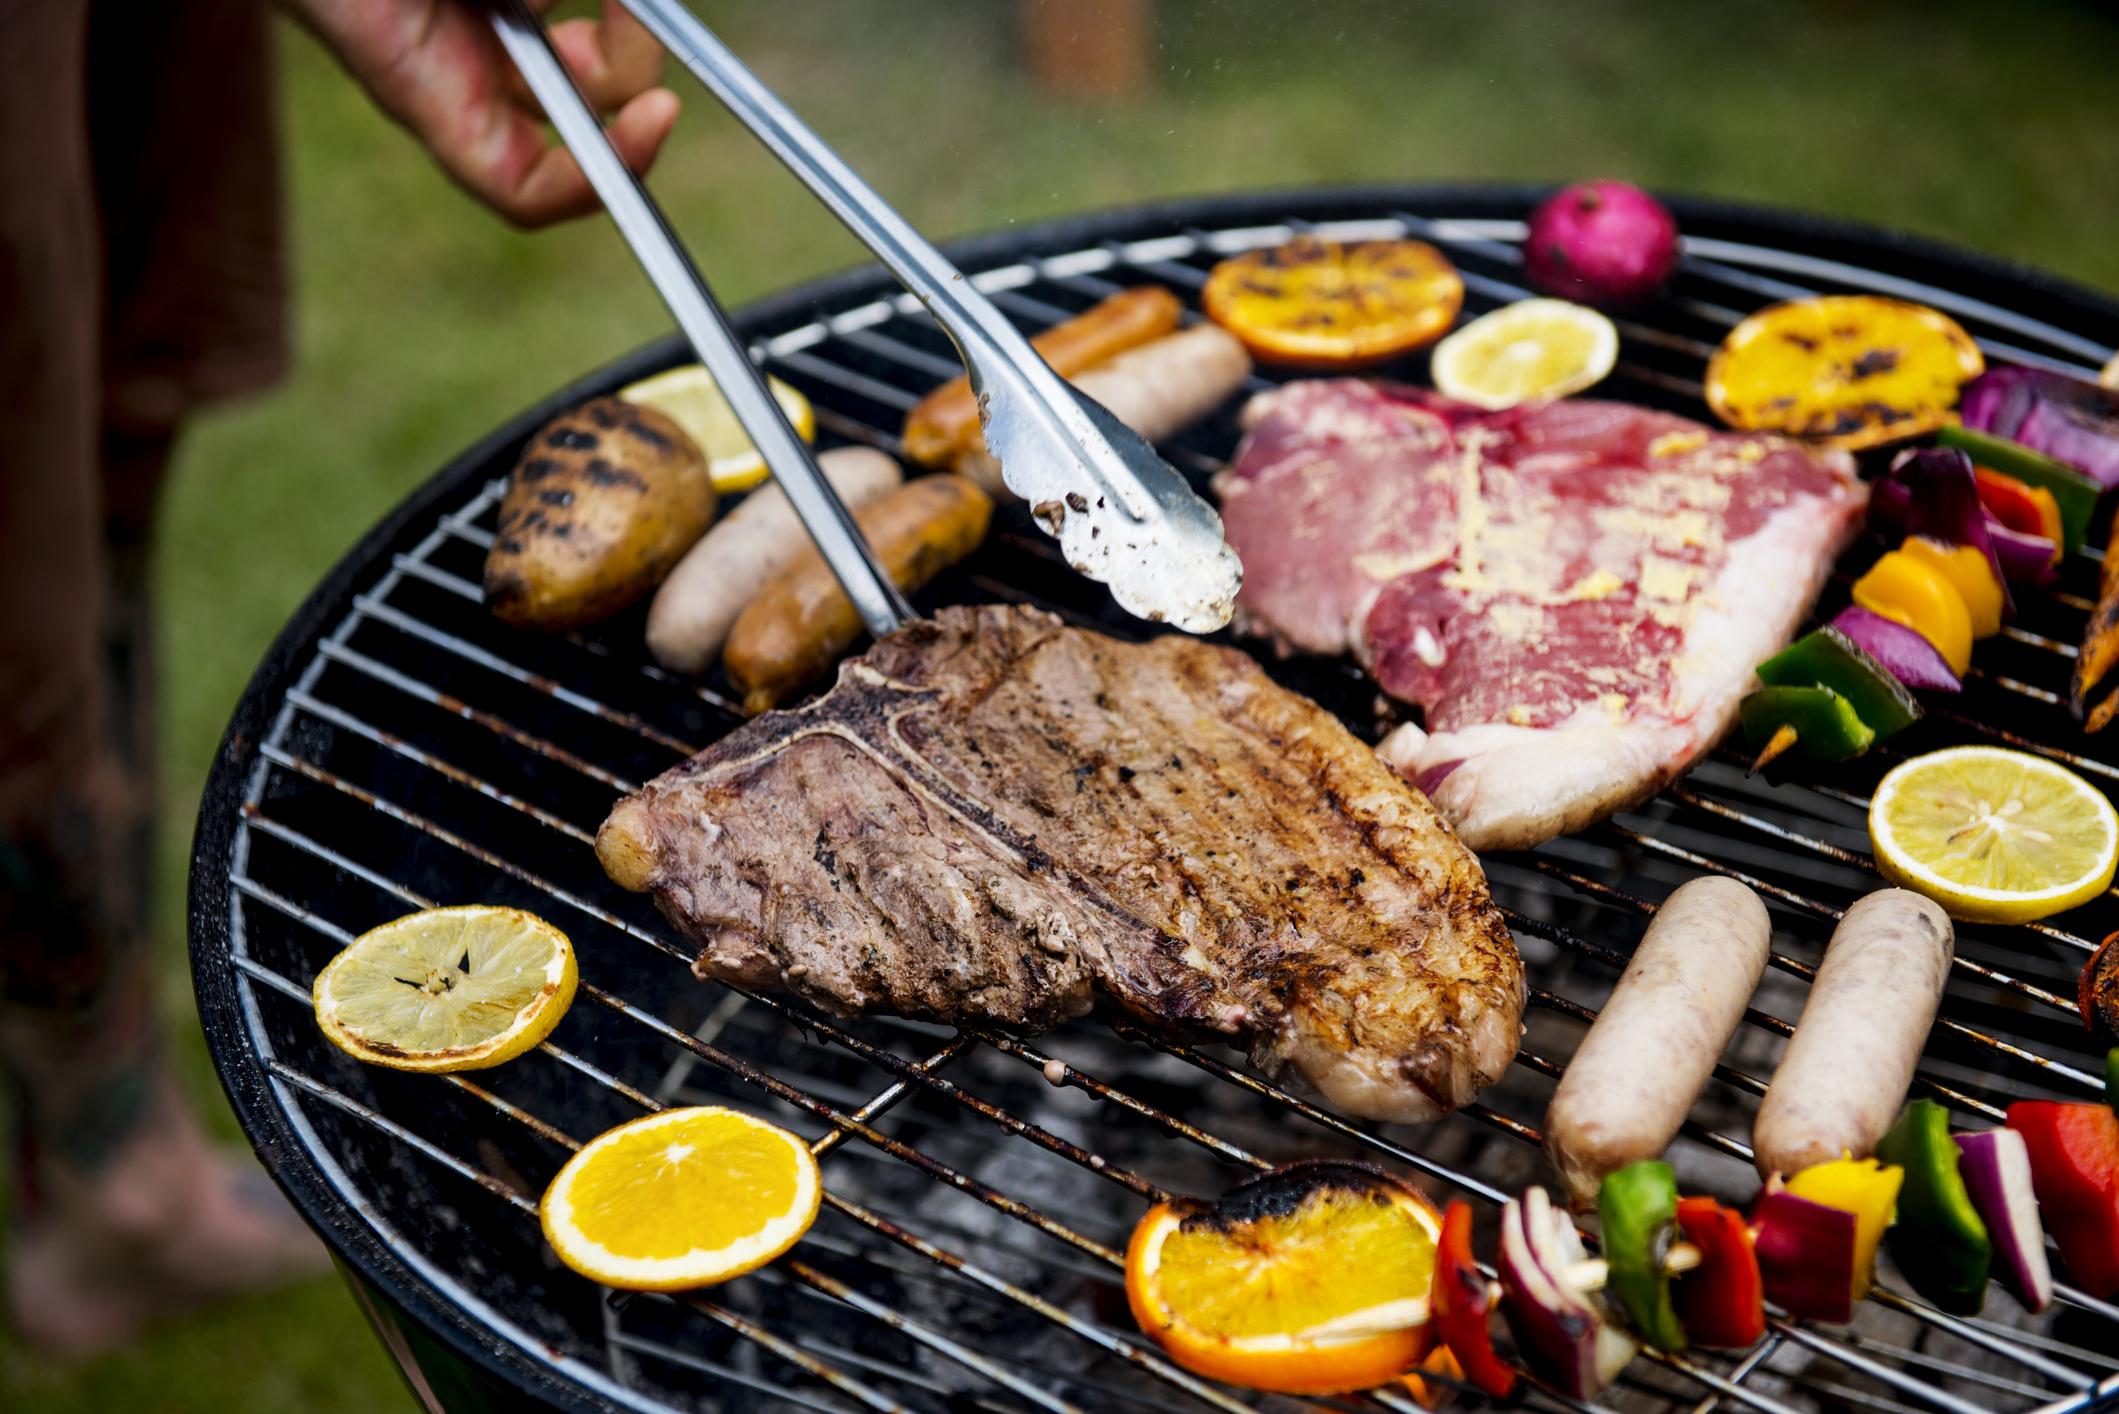  A closeup image of a steaks, sausages and slices of orange on a charcoal BBQ grill. 